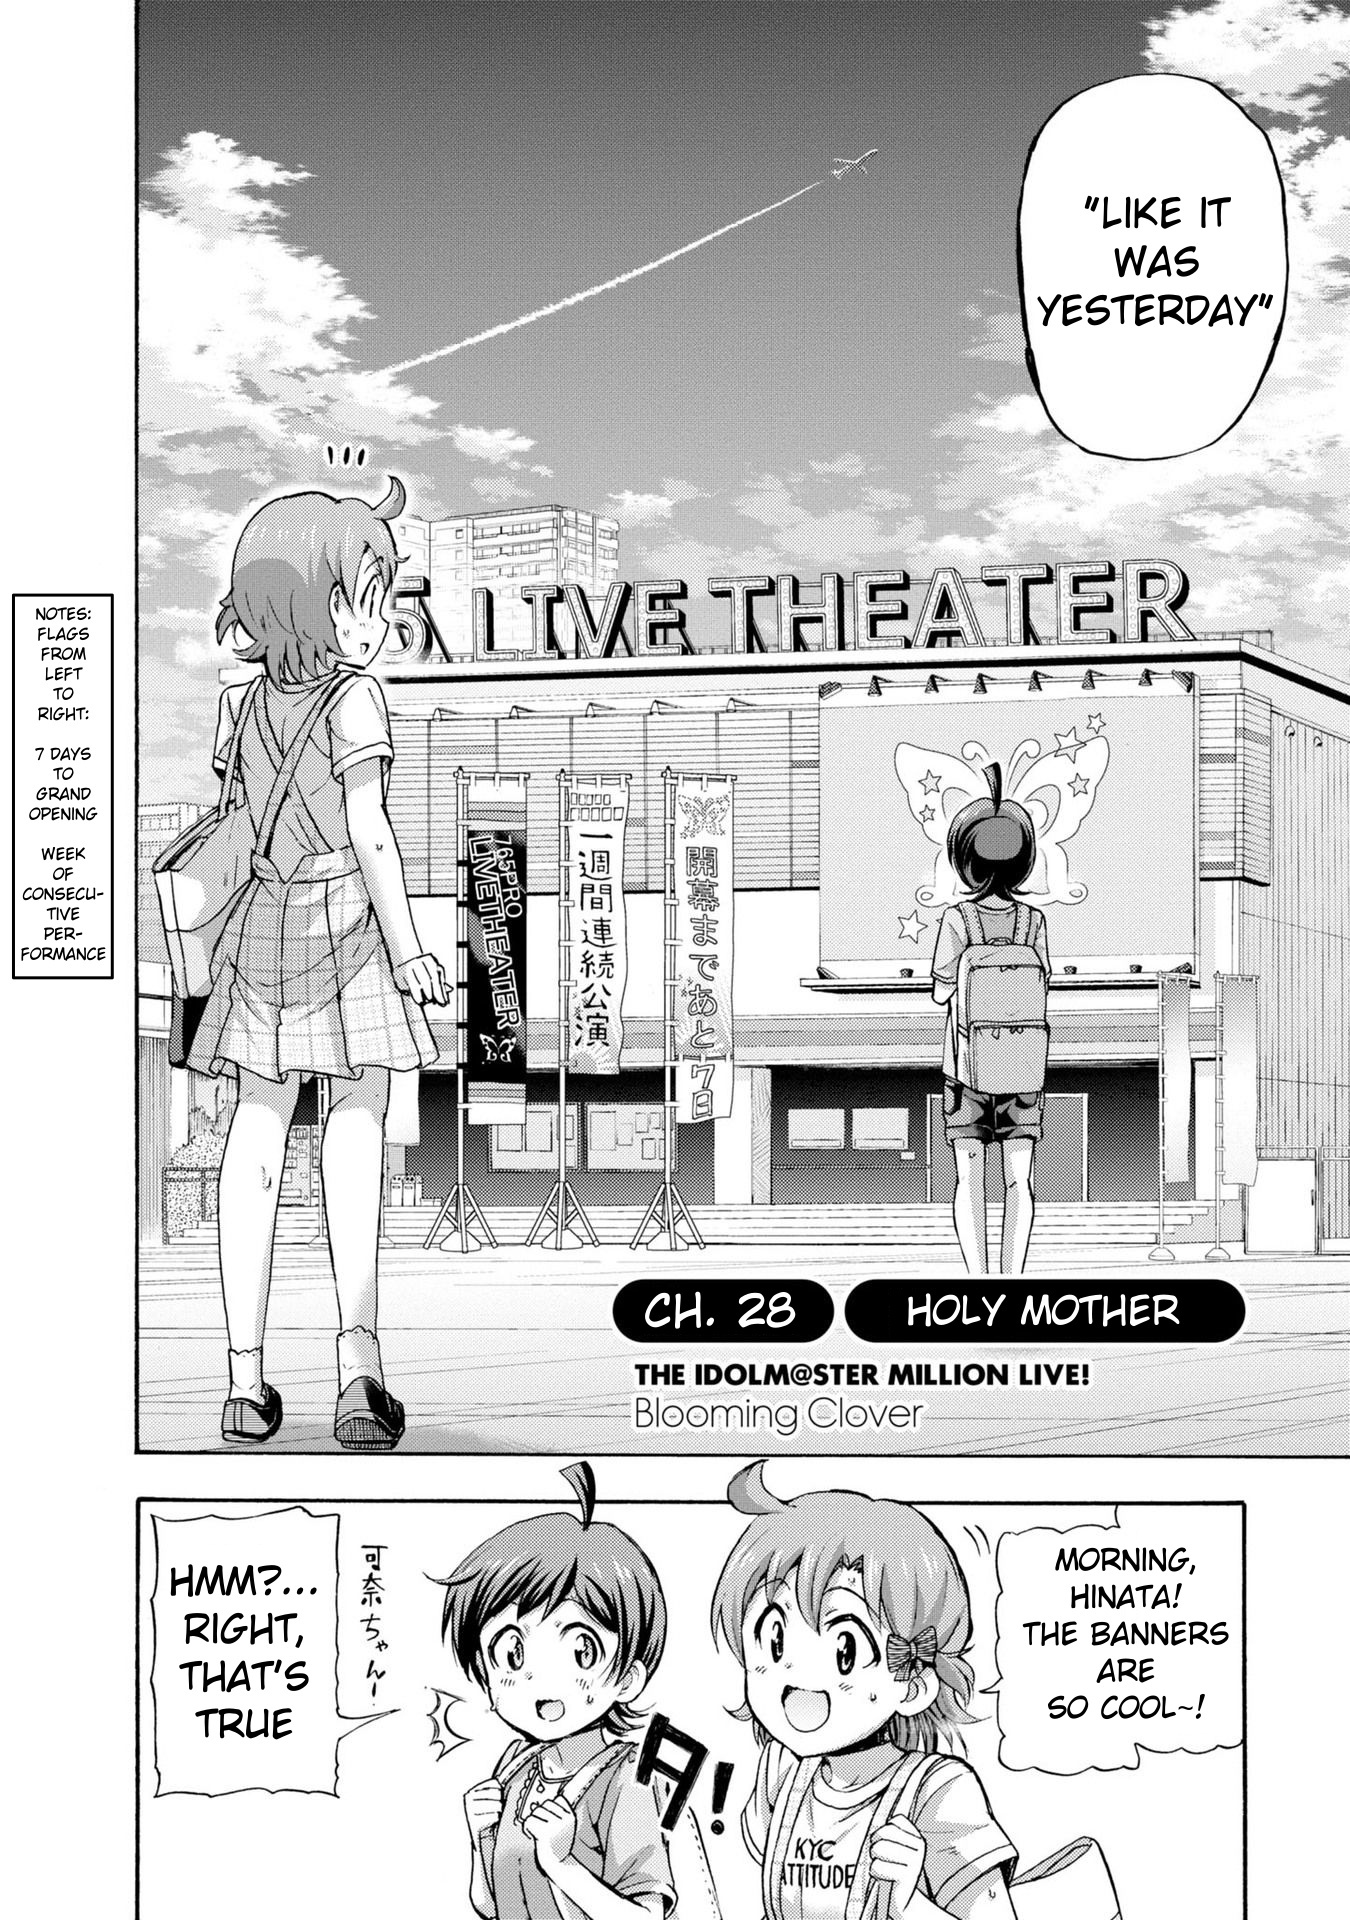 The Idolm@ster Million Live! Blooming Clover Vol.8 Chapter 28: Holy Mother - Picture 2